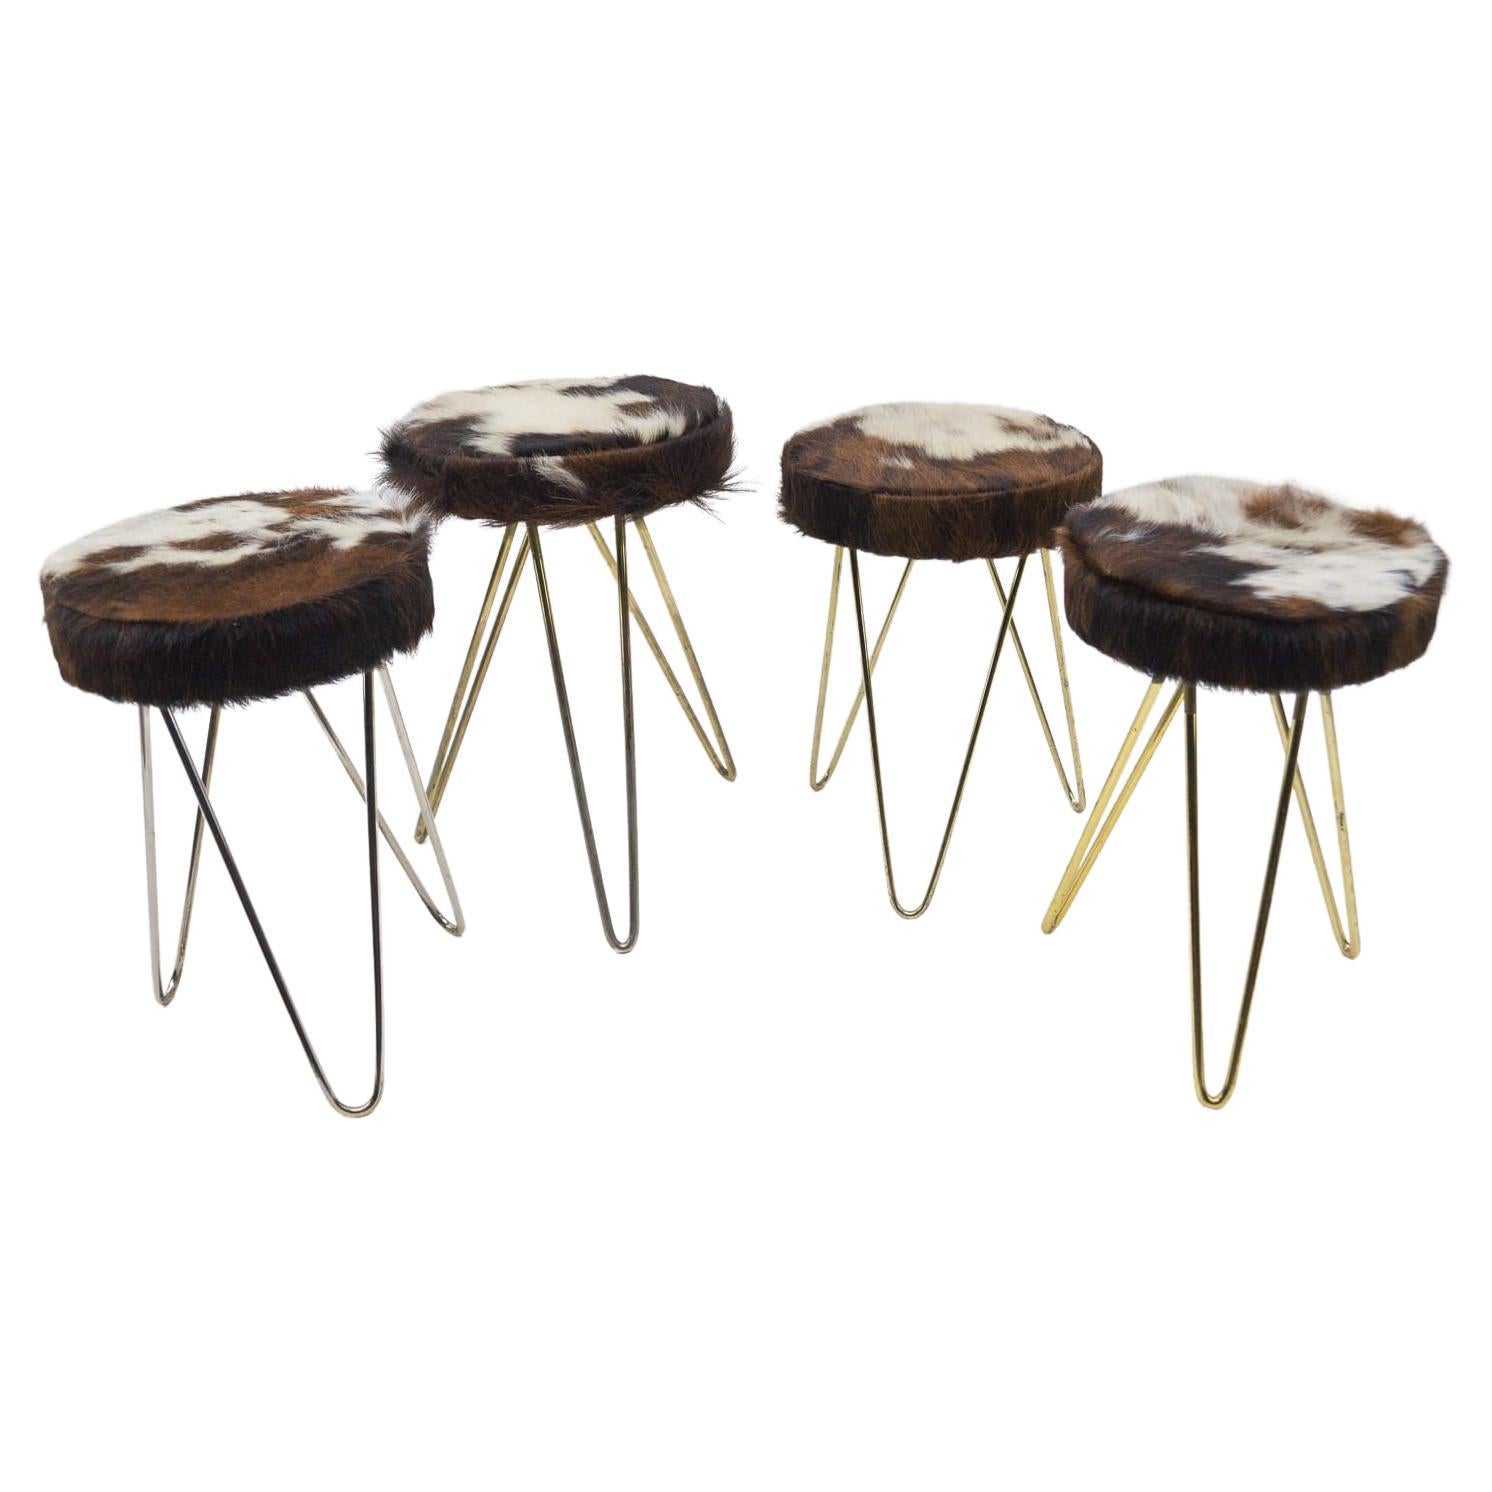 Set of 4 Mid-Century Modern Tripod Stools, 1950s  For Sale